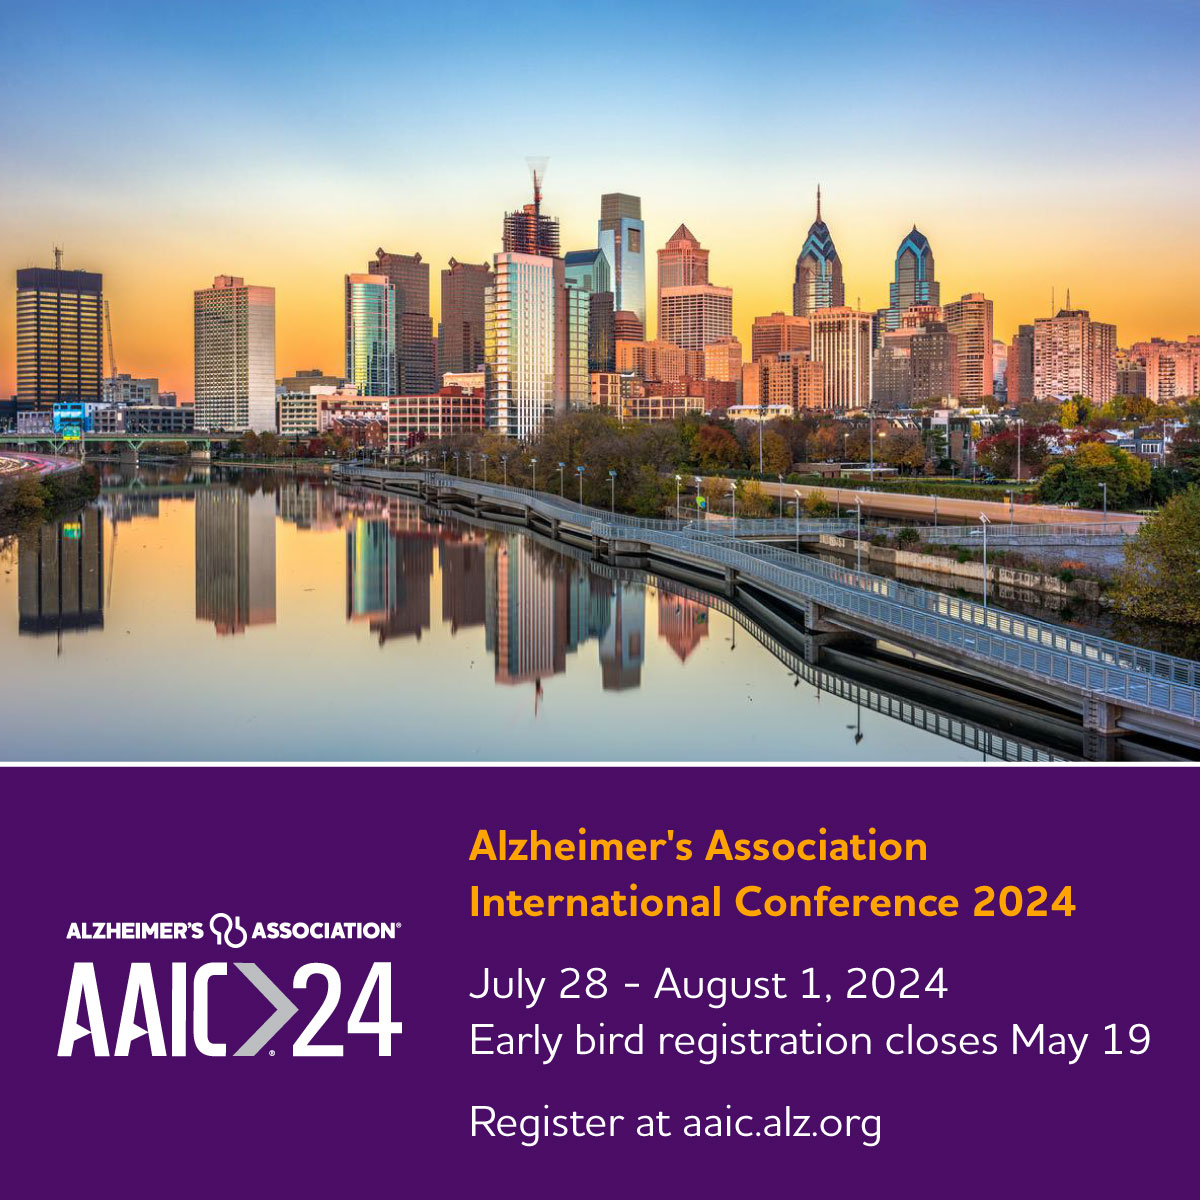 Network with researchers and clinicians from around the 🌍 and shape the future of dementia science at the @alzassociation’s #AAIC24, July 28 - August 1 in Philadelphia, USA, and online. Early-bird registration closes May 19. Register now to save: alz.org/aaic.